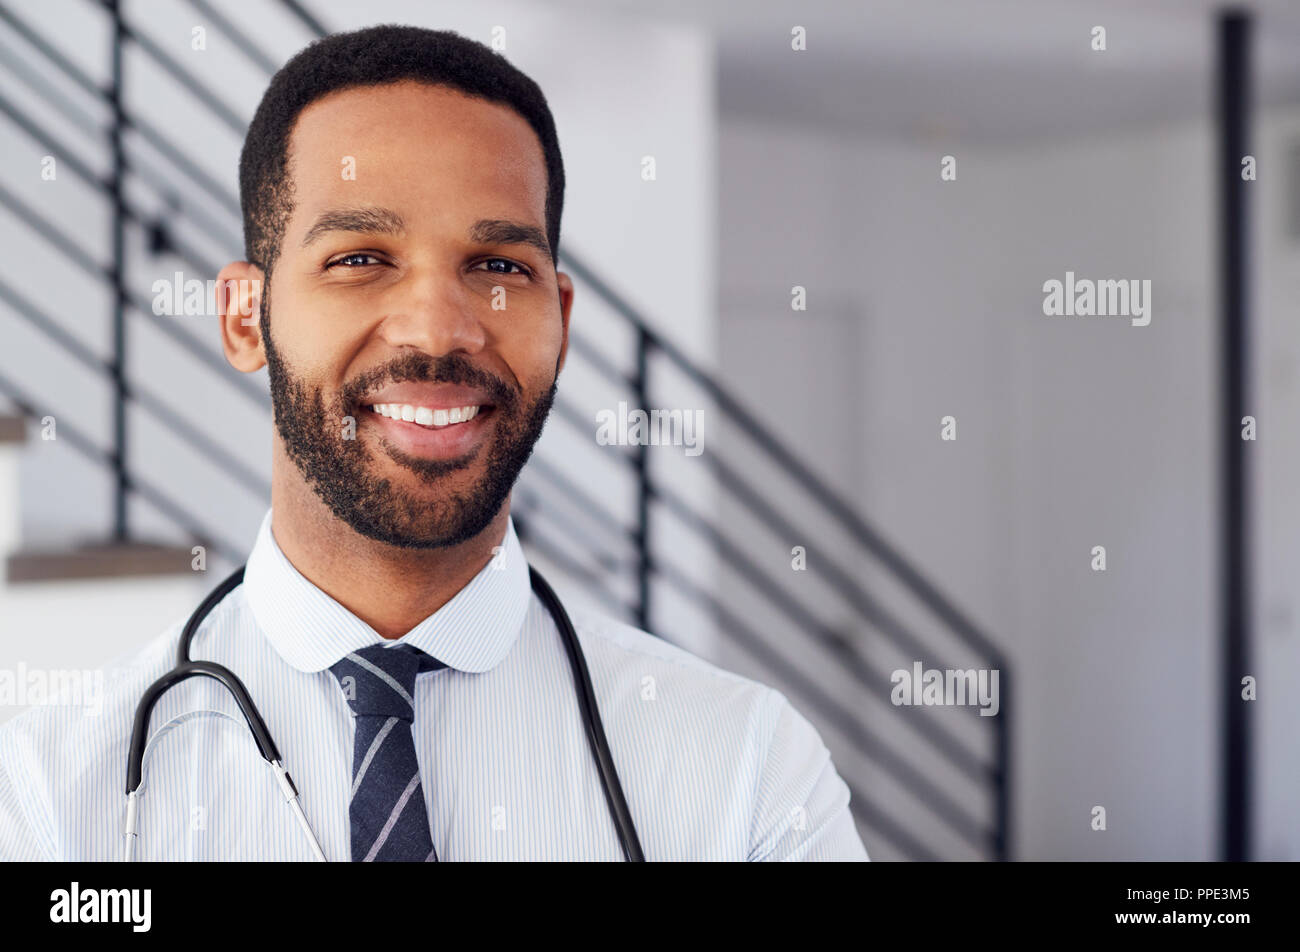 Portrait Of Male Doctor With Stethoscope In Hospital Stock Photo